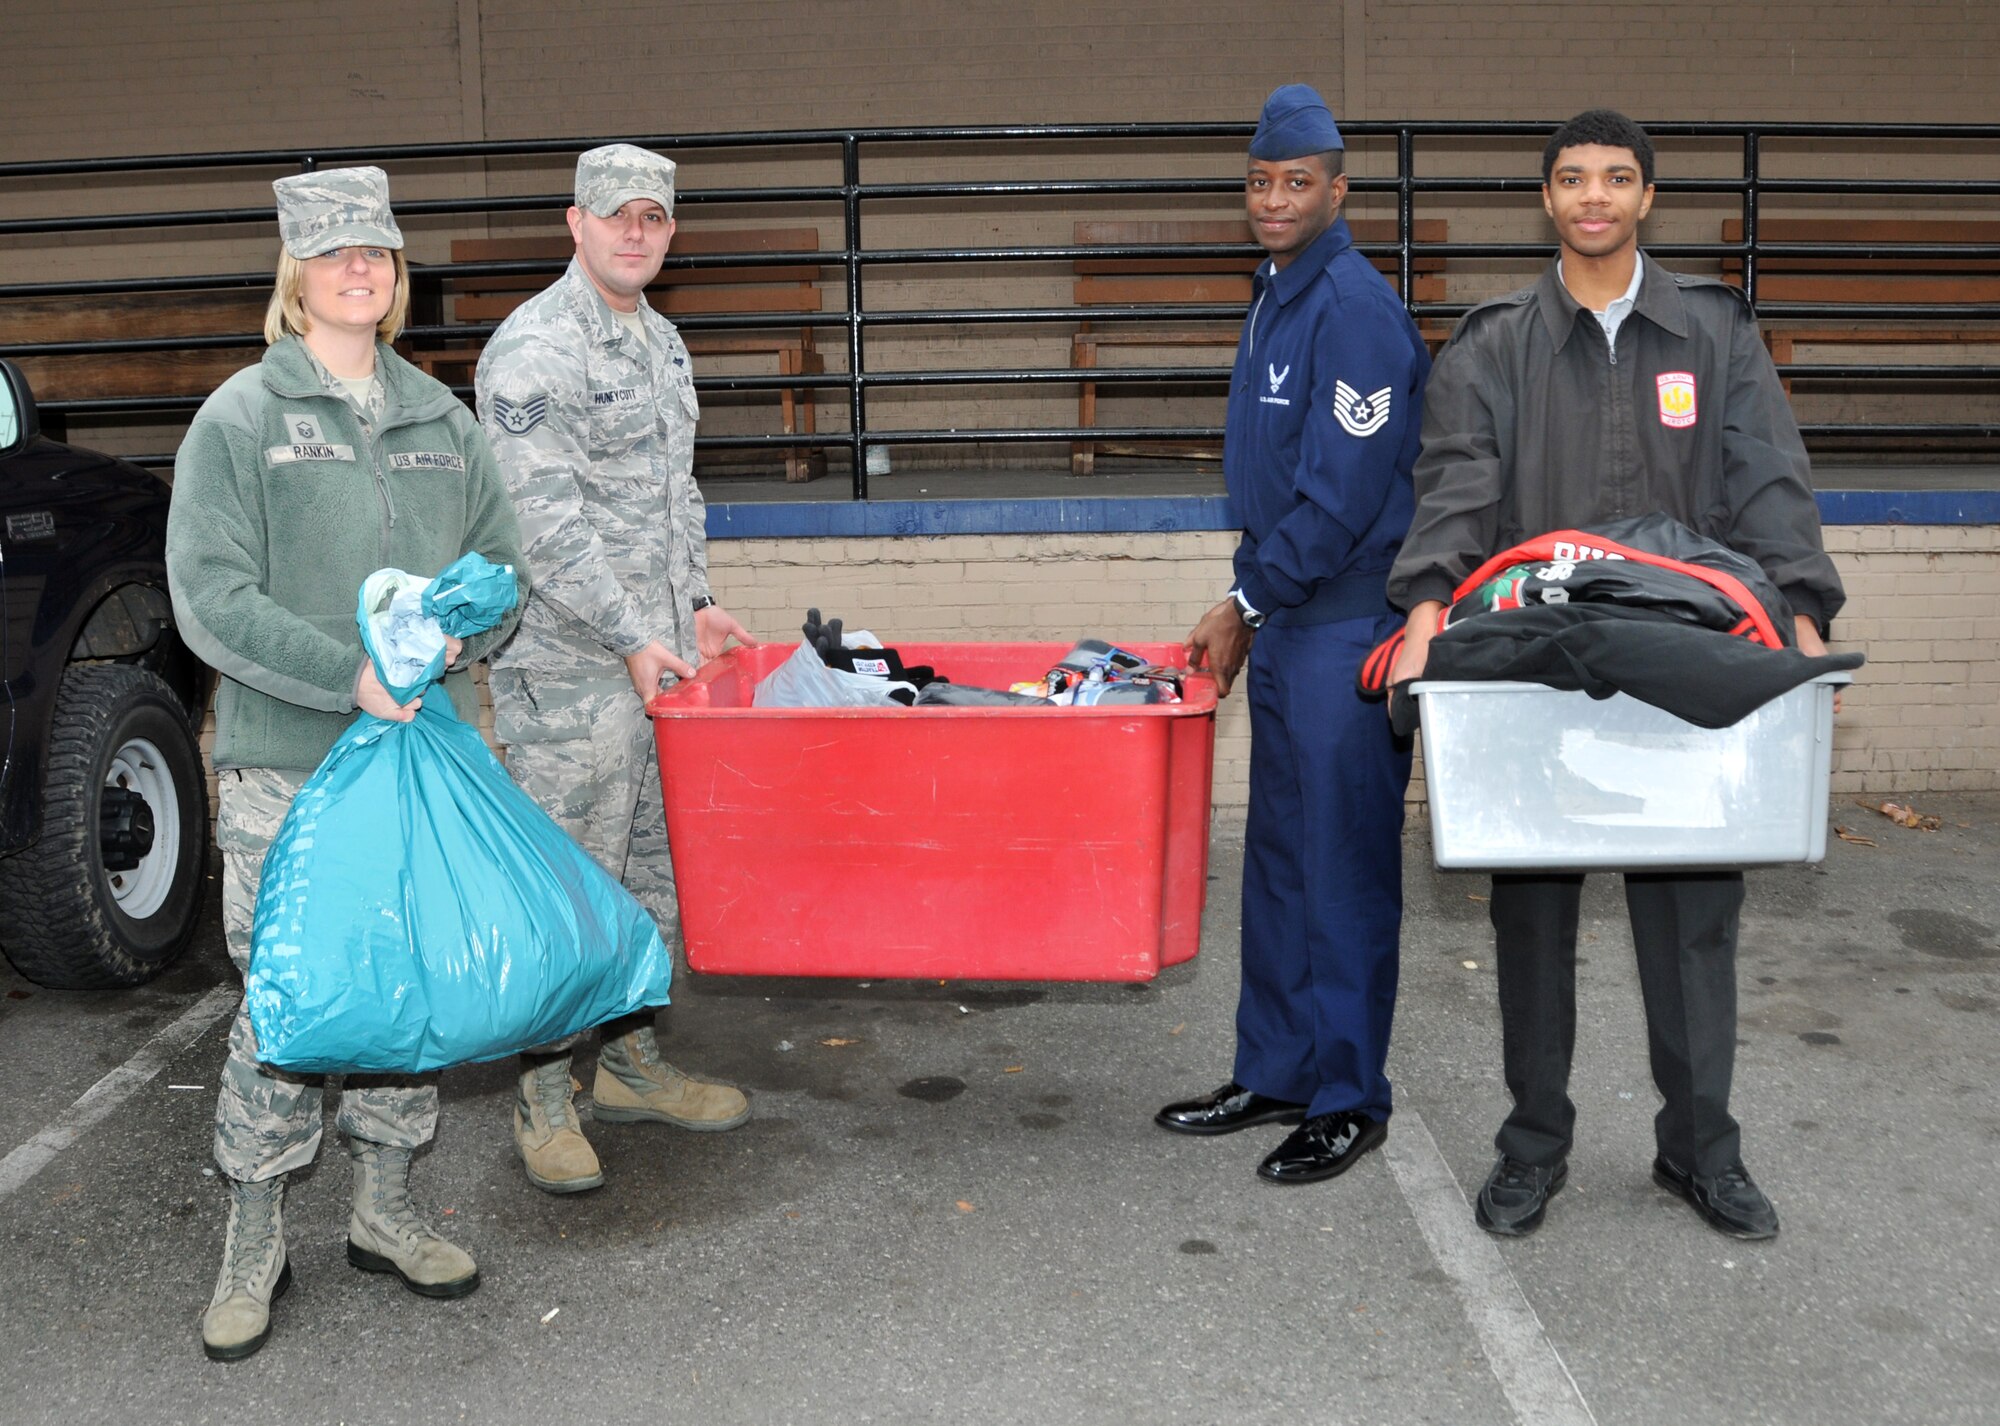 U.S. Air Force Master Sgt. Tracie Rankin, President of the 145th Airlift Wing’s Chapter 7 Association, Director at Large, Staff Sgt. Jessie Huneycutt, Vice President, Tech. Sgt. Lonnie Brooks and Gregory Landrum, a student from Military Global Leadership Academy get ready to deliver winter clothing donated by members of the North Carolina Air National Guard to a homeless shelter in Charlotte, N.C.  Men’s coats, hats, gloves and other items were collected by members of Chapter 7 and delivered to a local homeless shelter in Charlotte, N.C. just as a winter storm hits the Carolinas. (U.S. Air National Guard photo by Master Sgt. Patricia F. Moran/Released)  